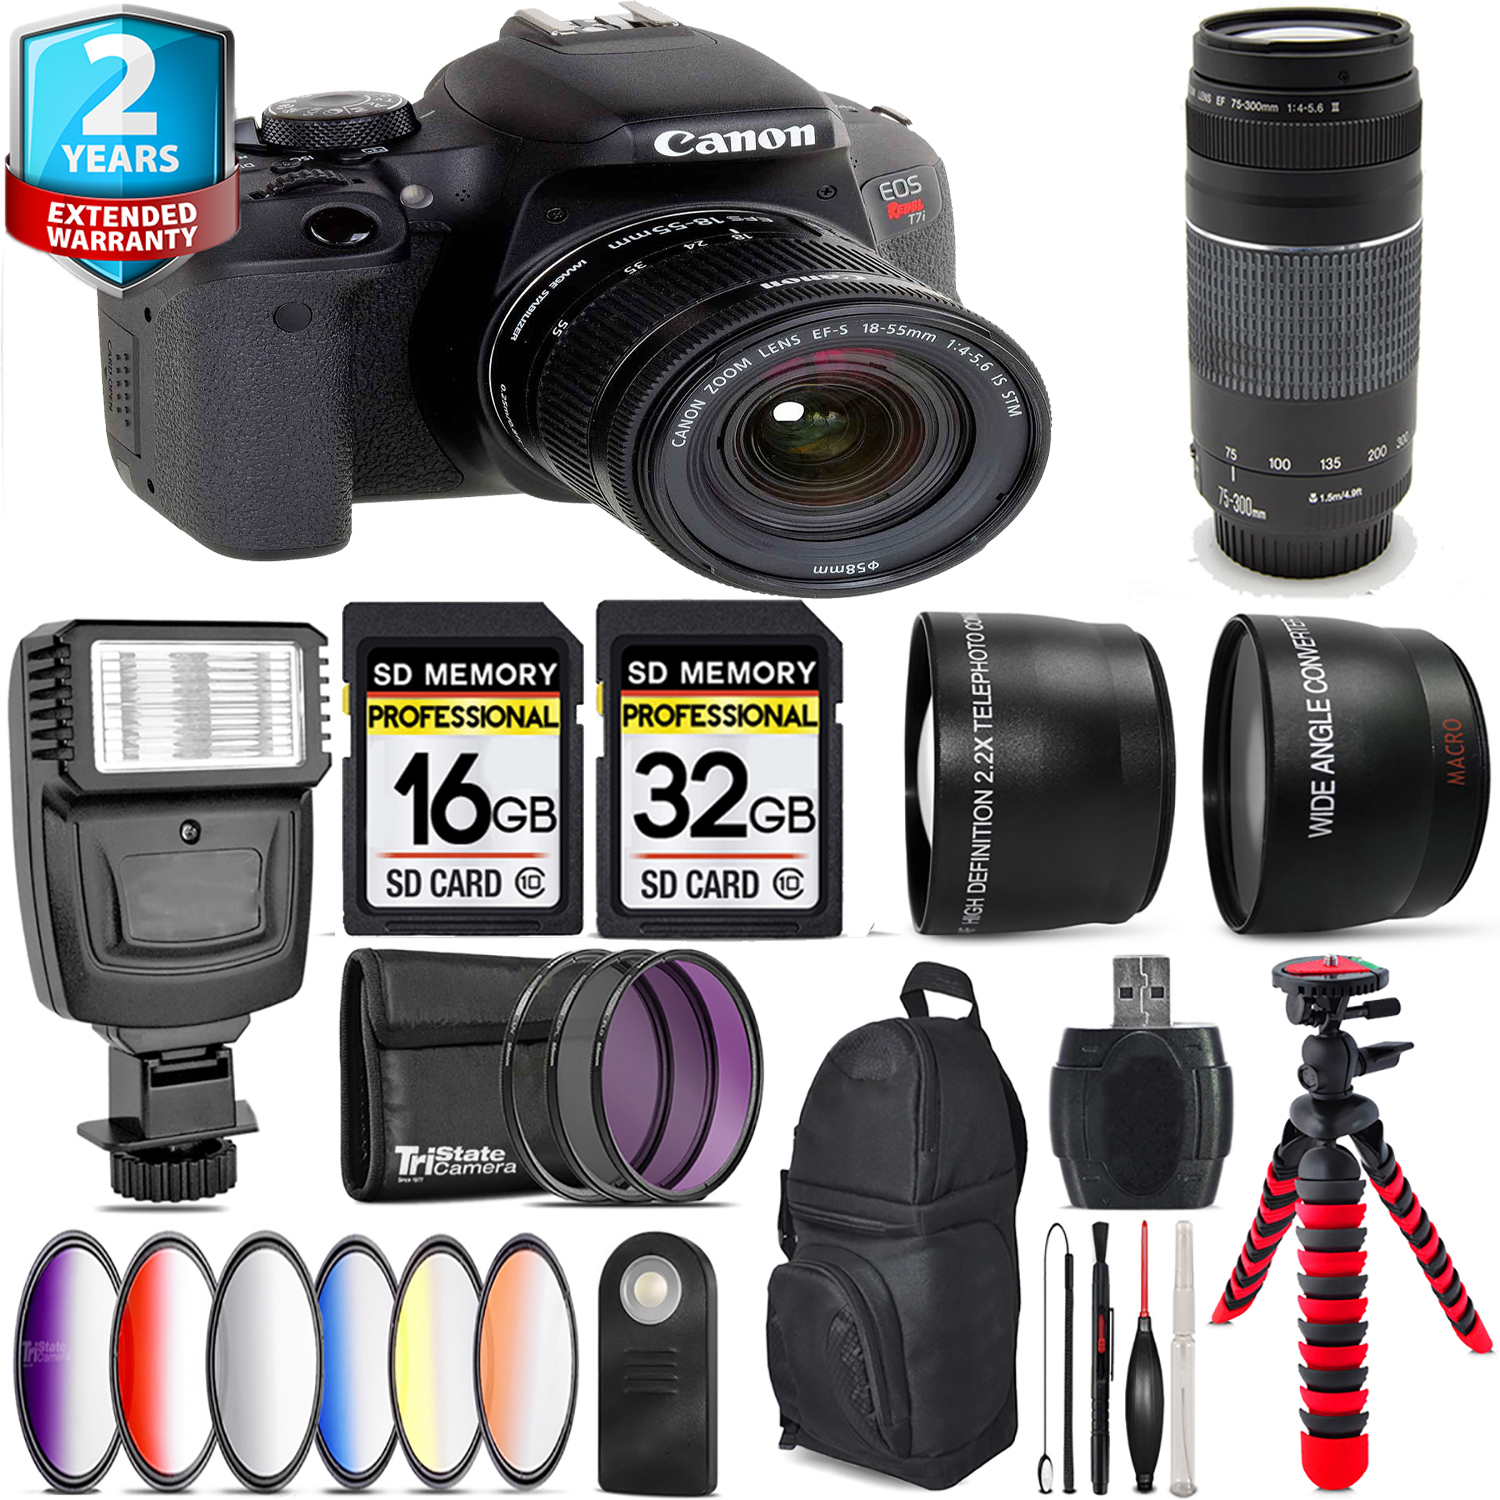 EOS Rebel T7i + 18-55mm IS STM + 75- 300mm III + Slave Flash - 48GB Kit *FREE SHIPPING*